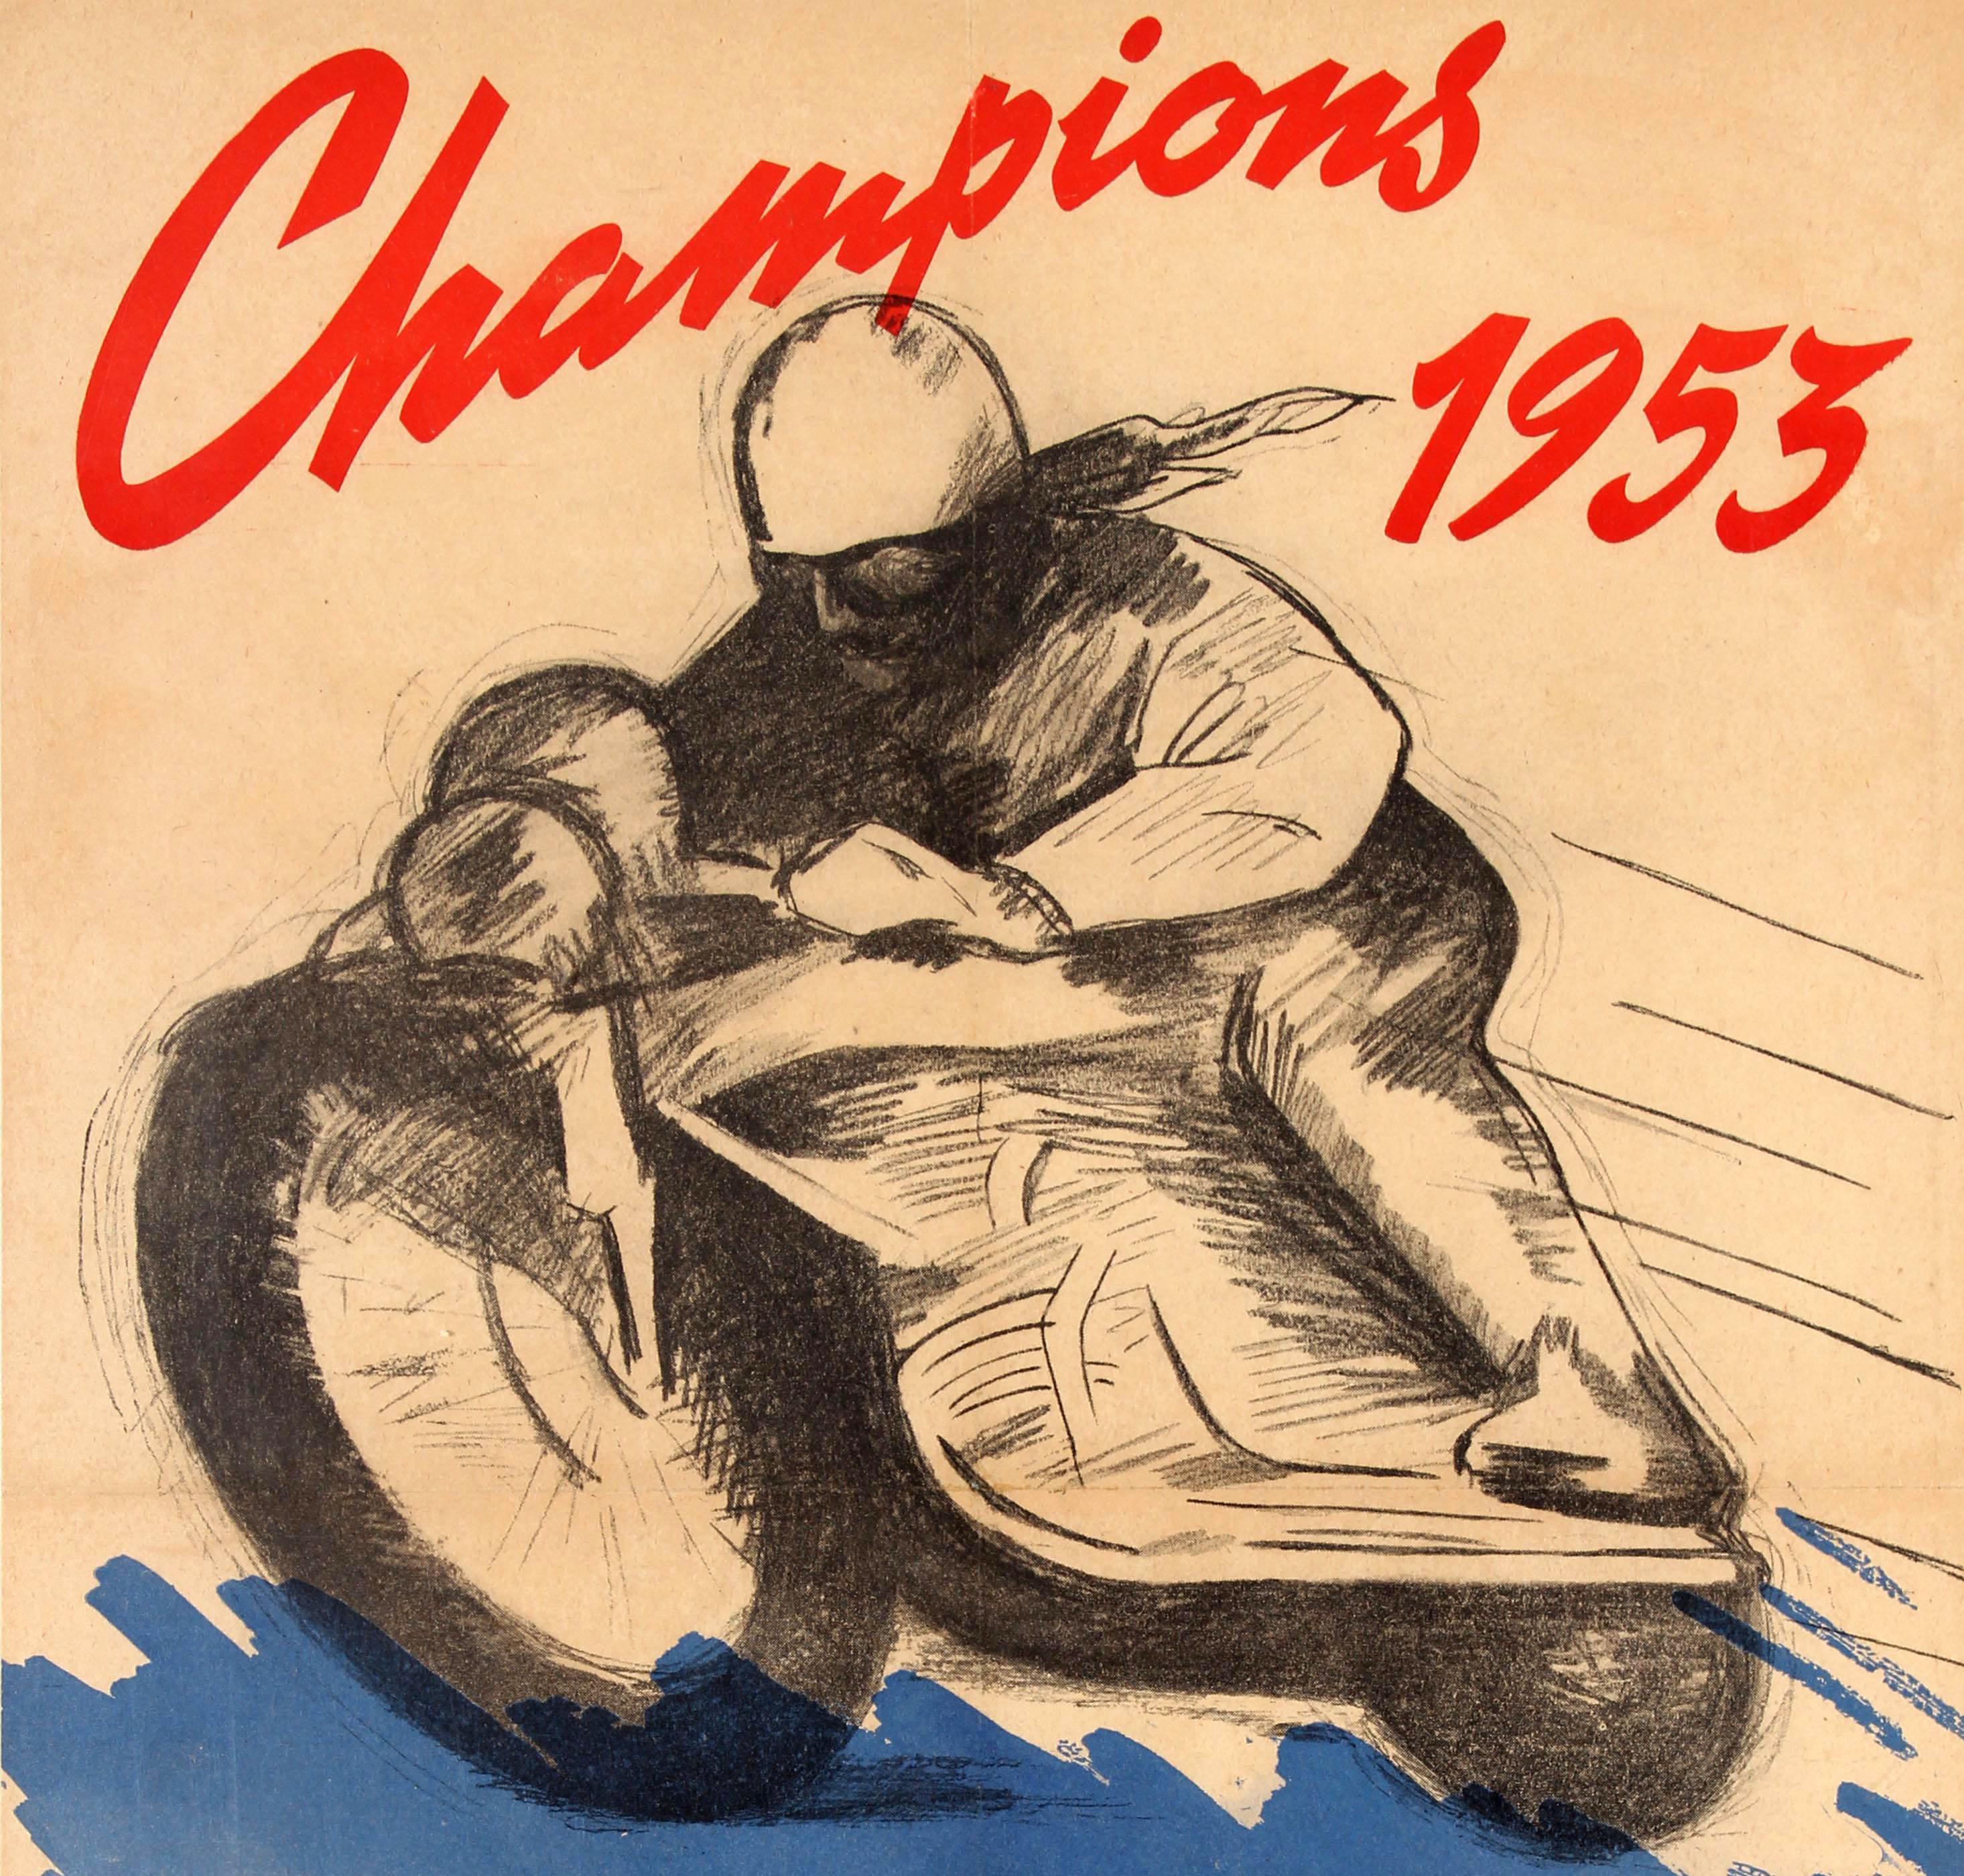 Original vintage motor sport advertising poster published by Bret-Oil in celebration of the 1953 Motorcycling Champions win by G. Monneret, P. Monneret, Camus and Lefevre using Bret Oil and by the Oliver, Collot, Schaad and Godey using its super